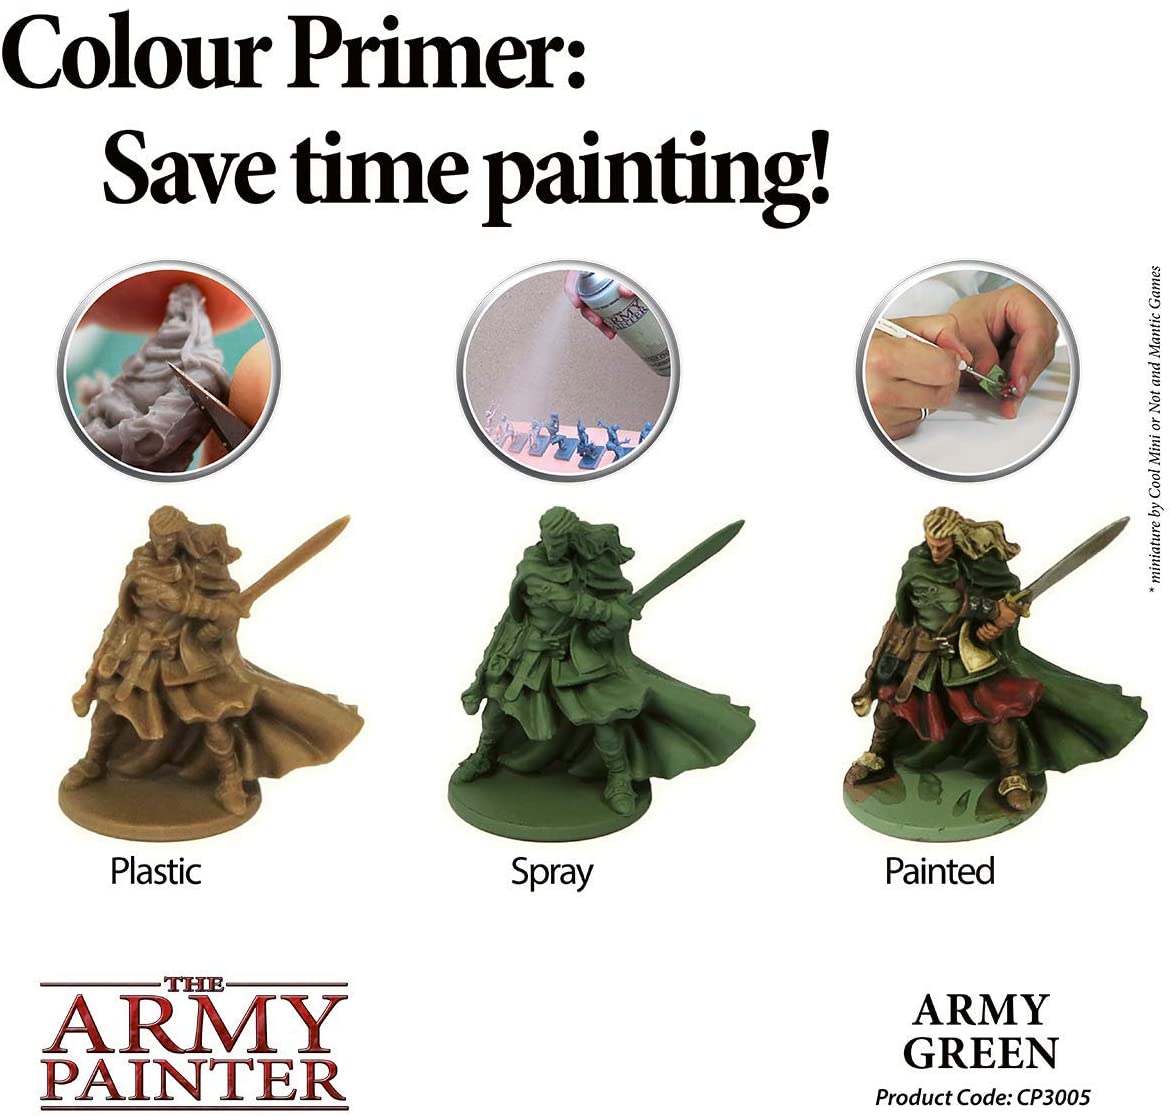 The Army Painter Color Primer Spray Paint, Army Green, 400ml, 13.5oz -  Acrylic Spray Undercoat for Miniature Painting - Spray Primer for Plastic